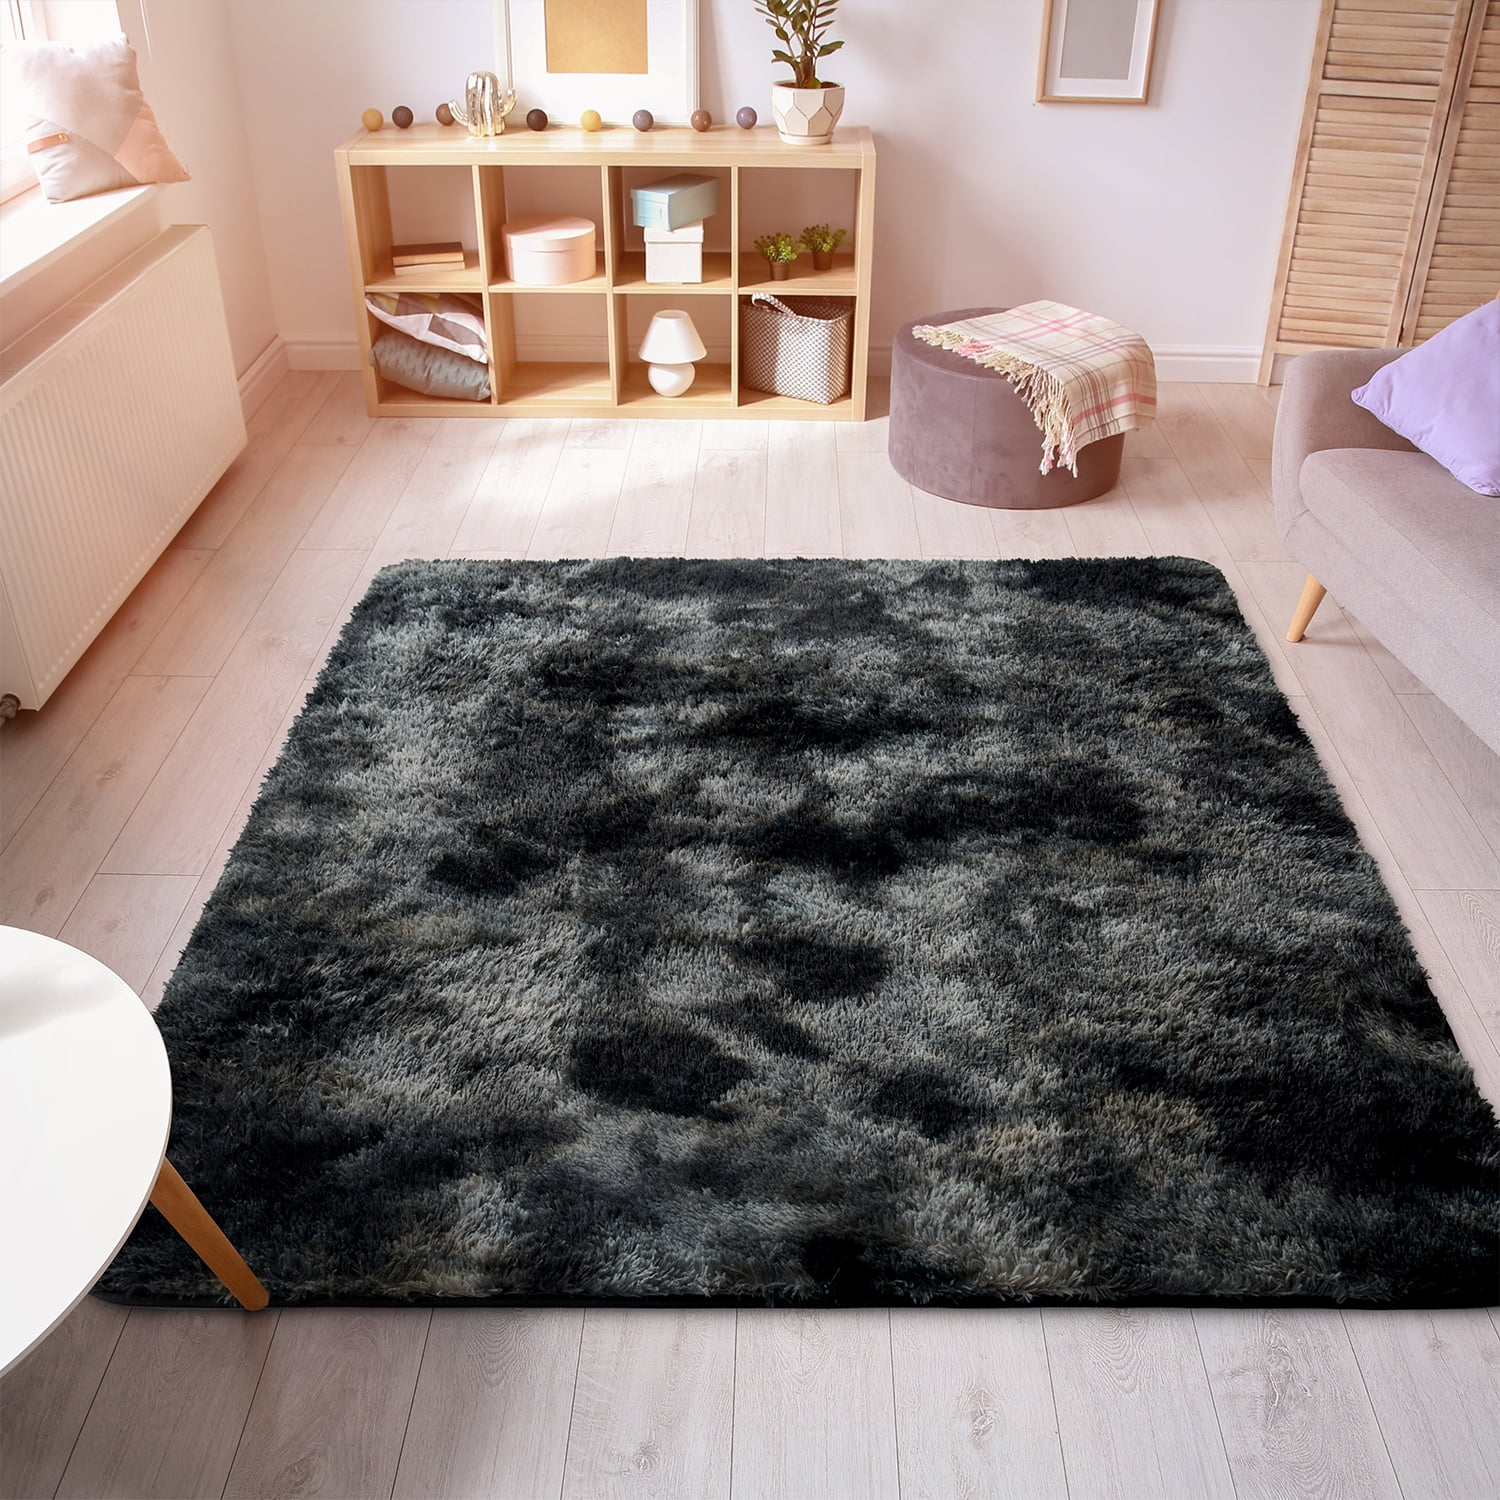 Super Soft Sunflower Green Leaves Area Rugs Anti-Skid Carpet Art Mat Decorator Play Game Non-Slip Mats for Sofa Door Living Room Bedroom and Dormitory